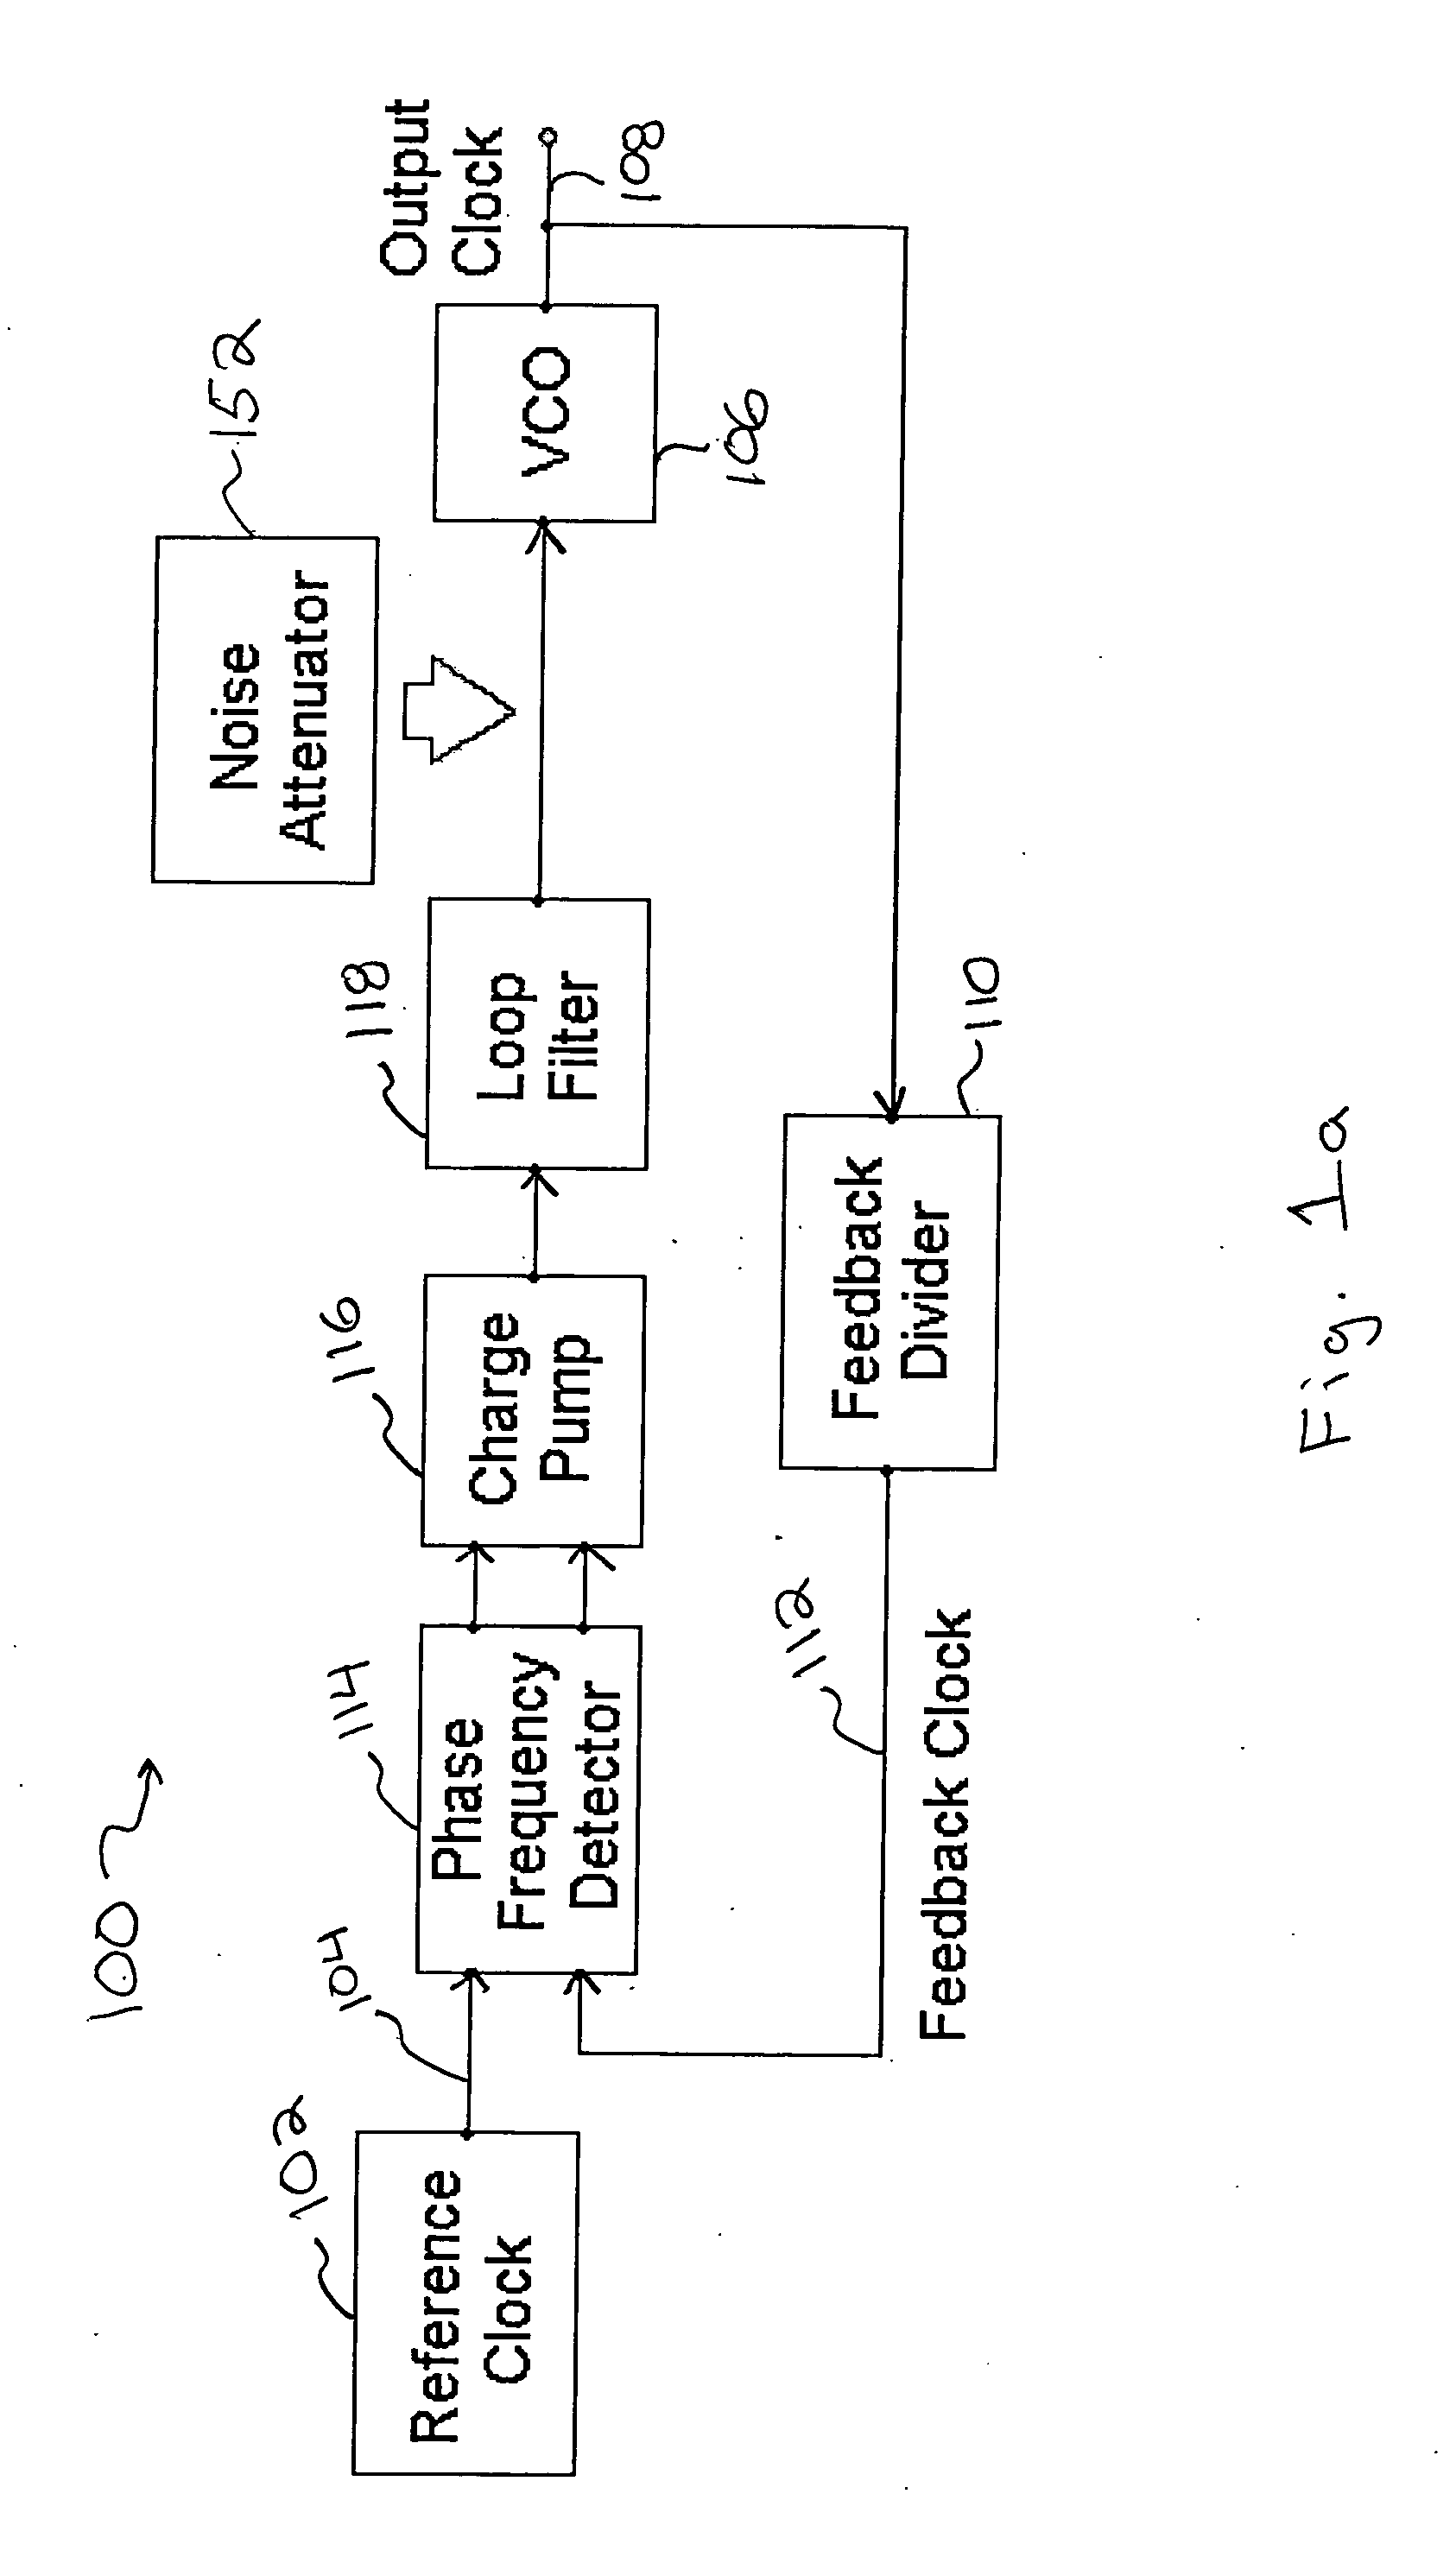 Method and apparatus to reduce the jitter in wideband PLL frequency synthesizers using noise attenuation